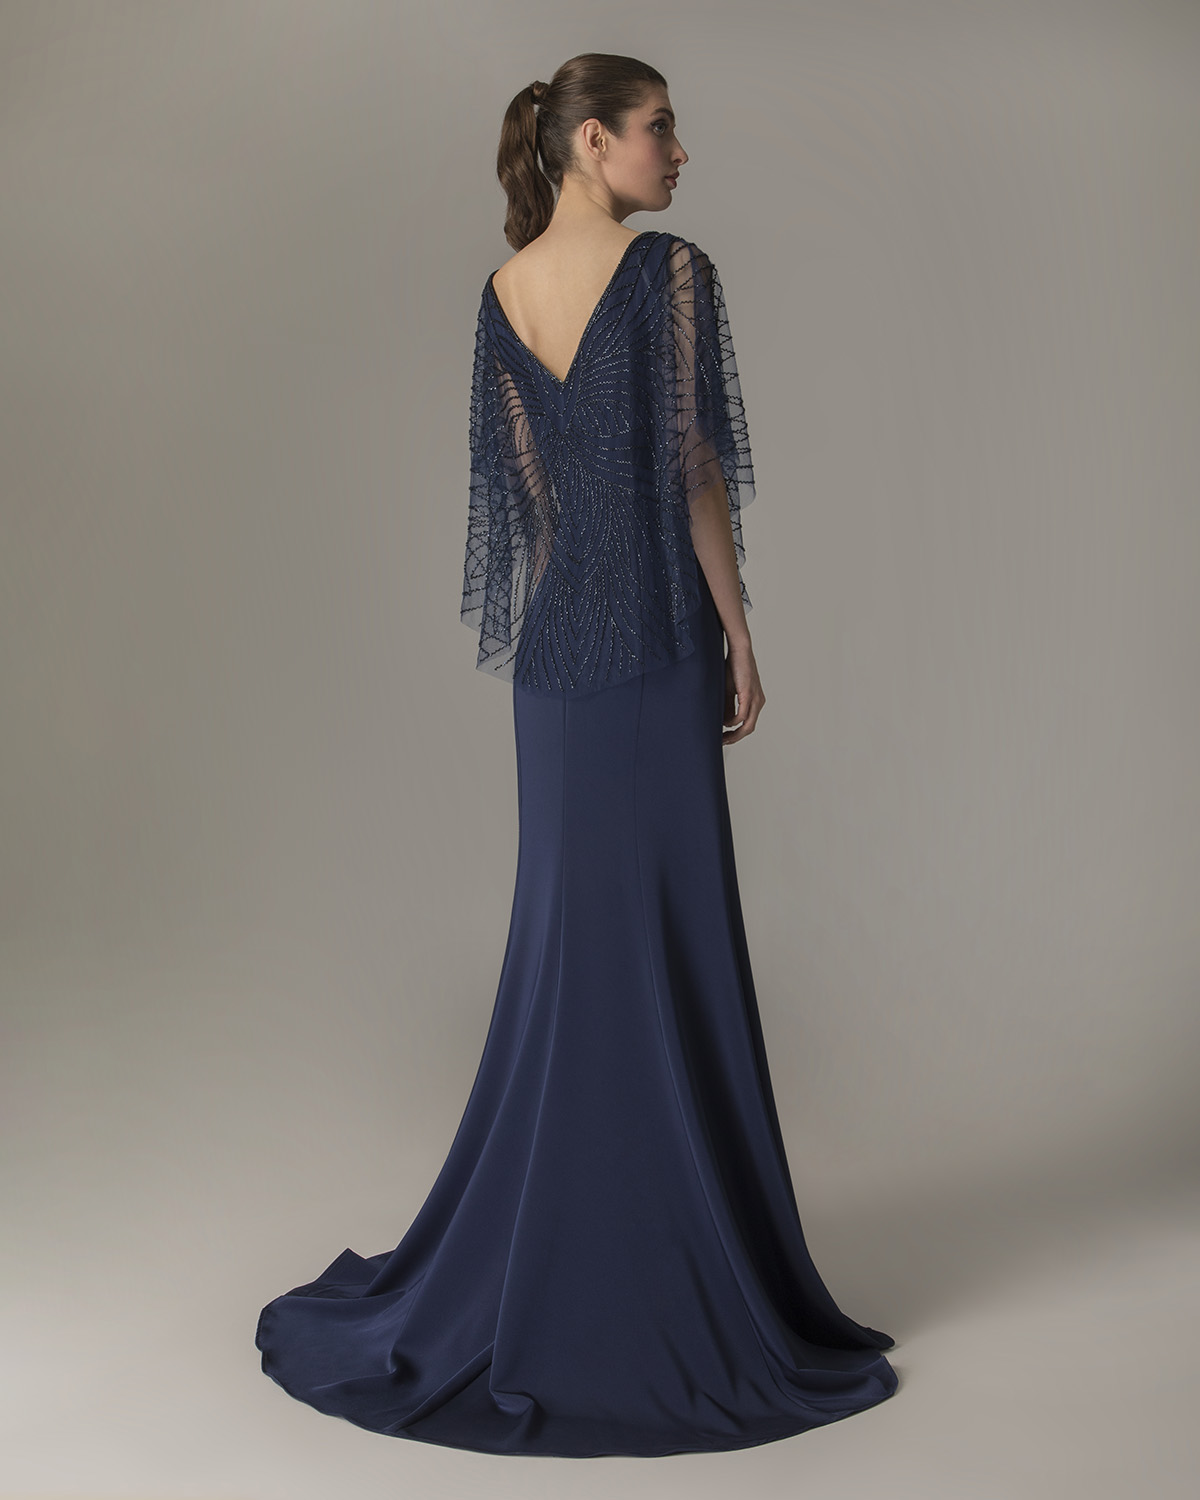 Classic Dresses / Long satin dress with beaded cape for the mother of the bride